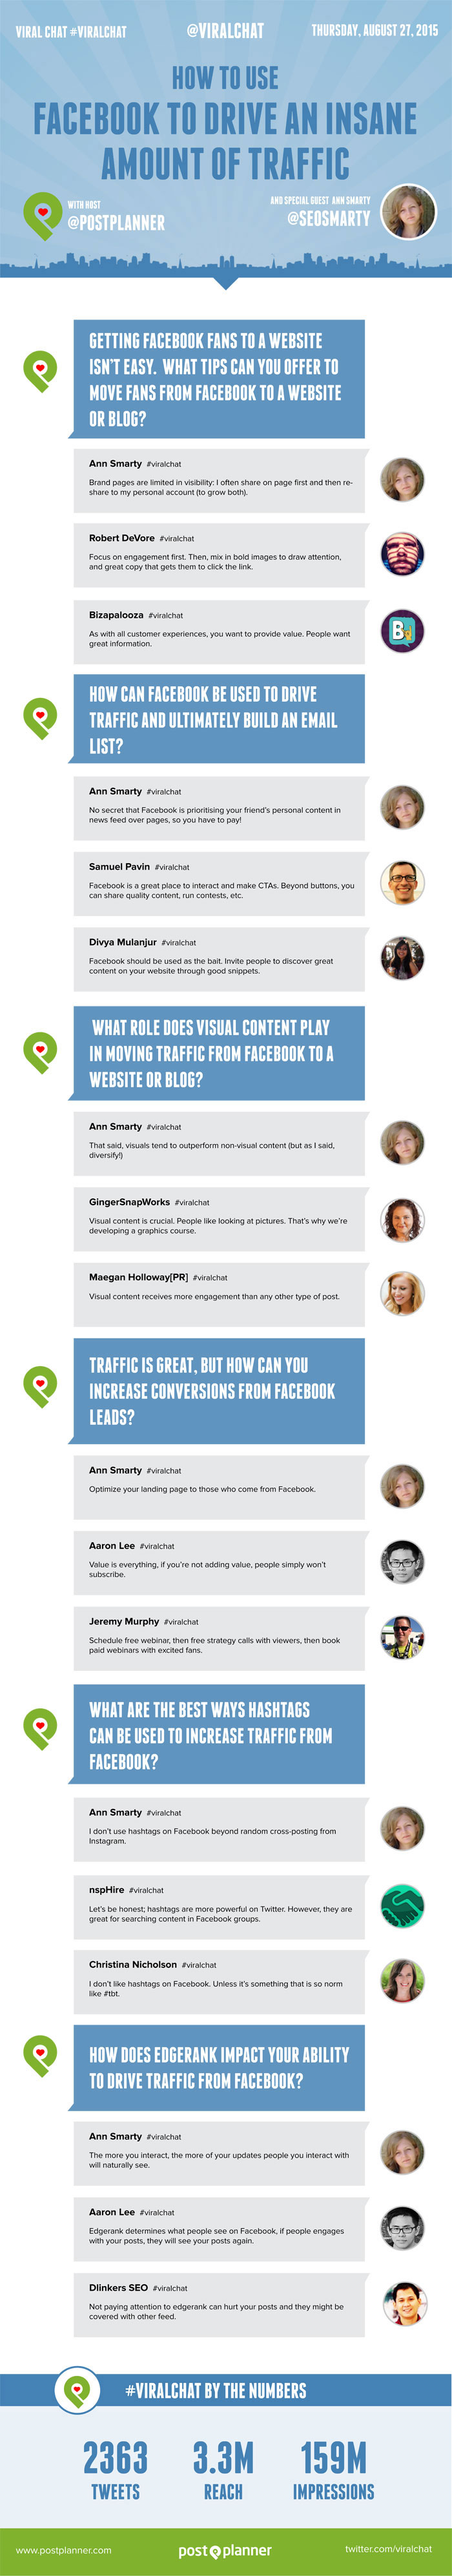 how-to-use-facebook-to-drive-traffic-infographic